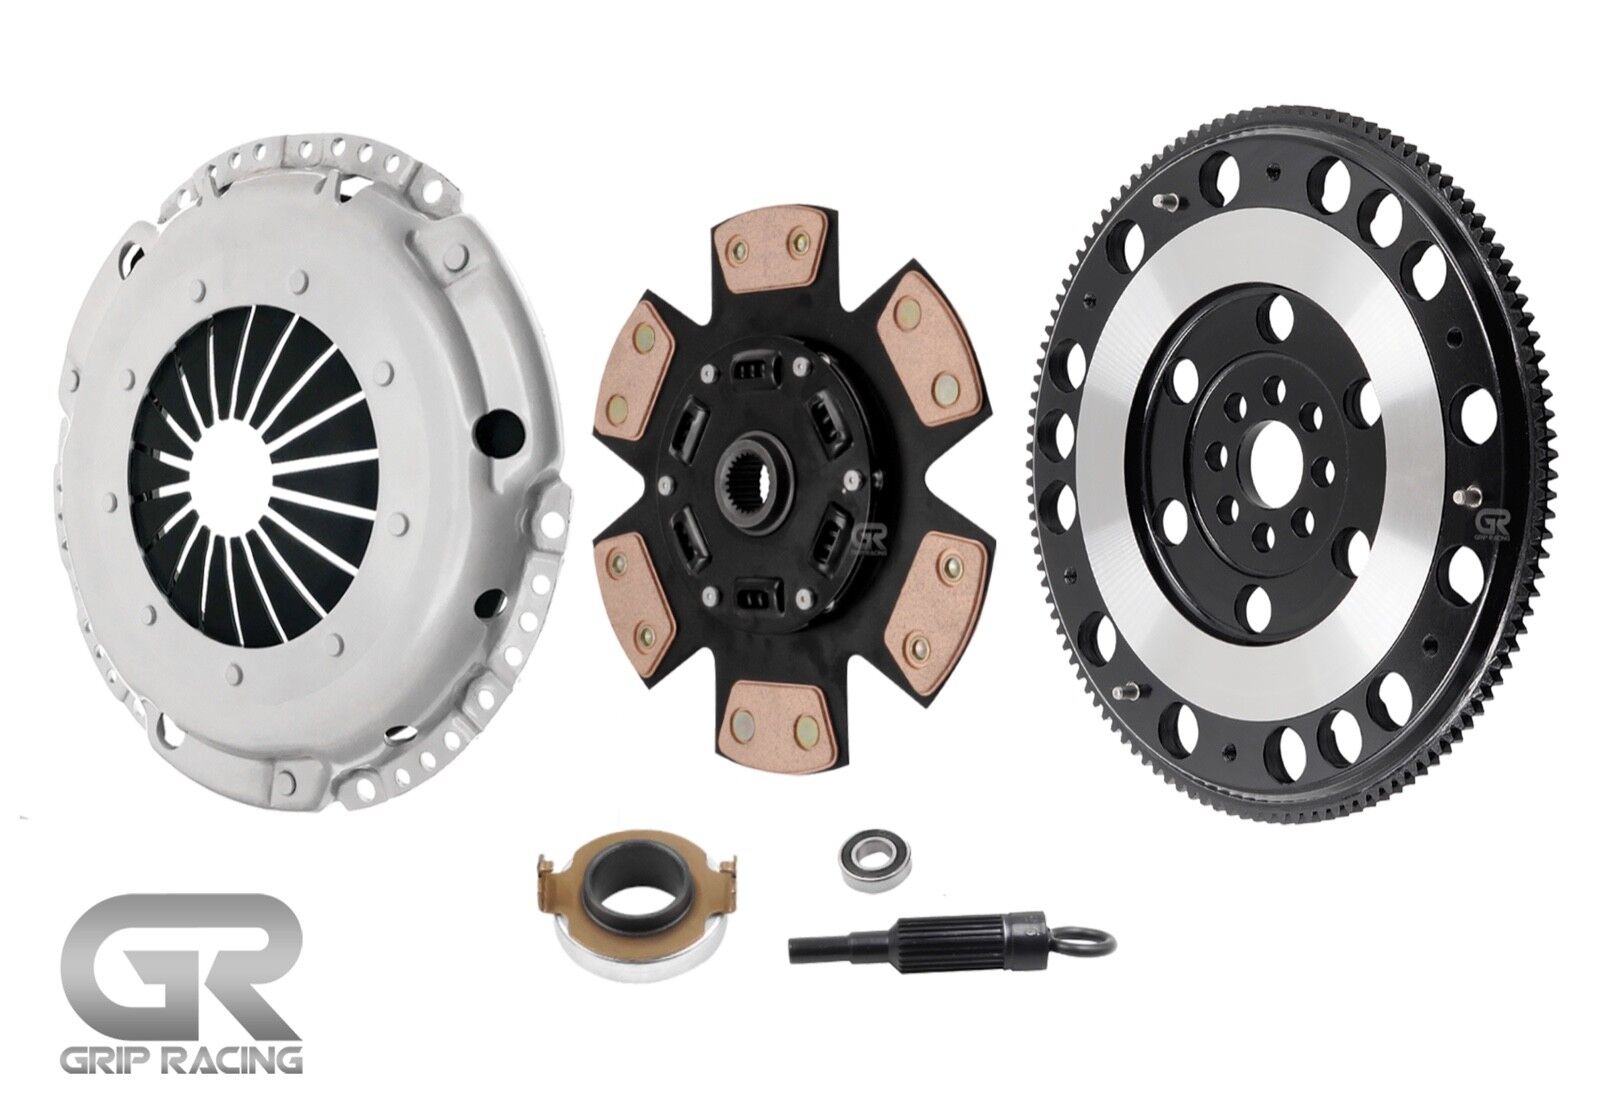 GRIP RACING STAGE 3 PERFORMANCE CLUTCH & FLYWHEEL KIT Fits ACURA RSX / CIVIC K20